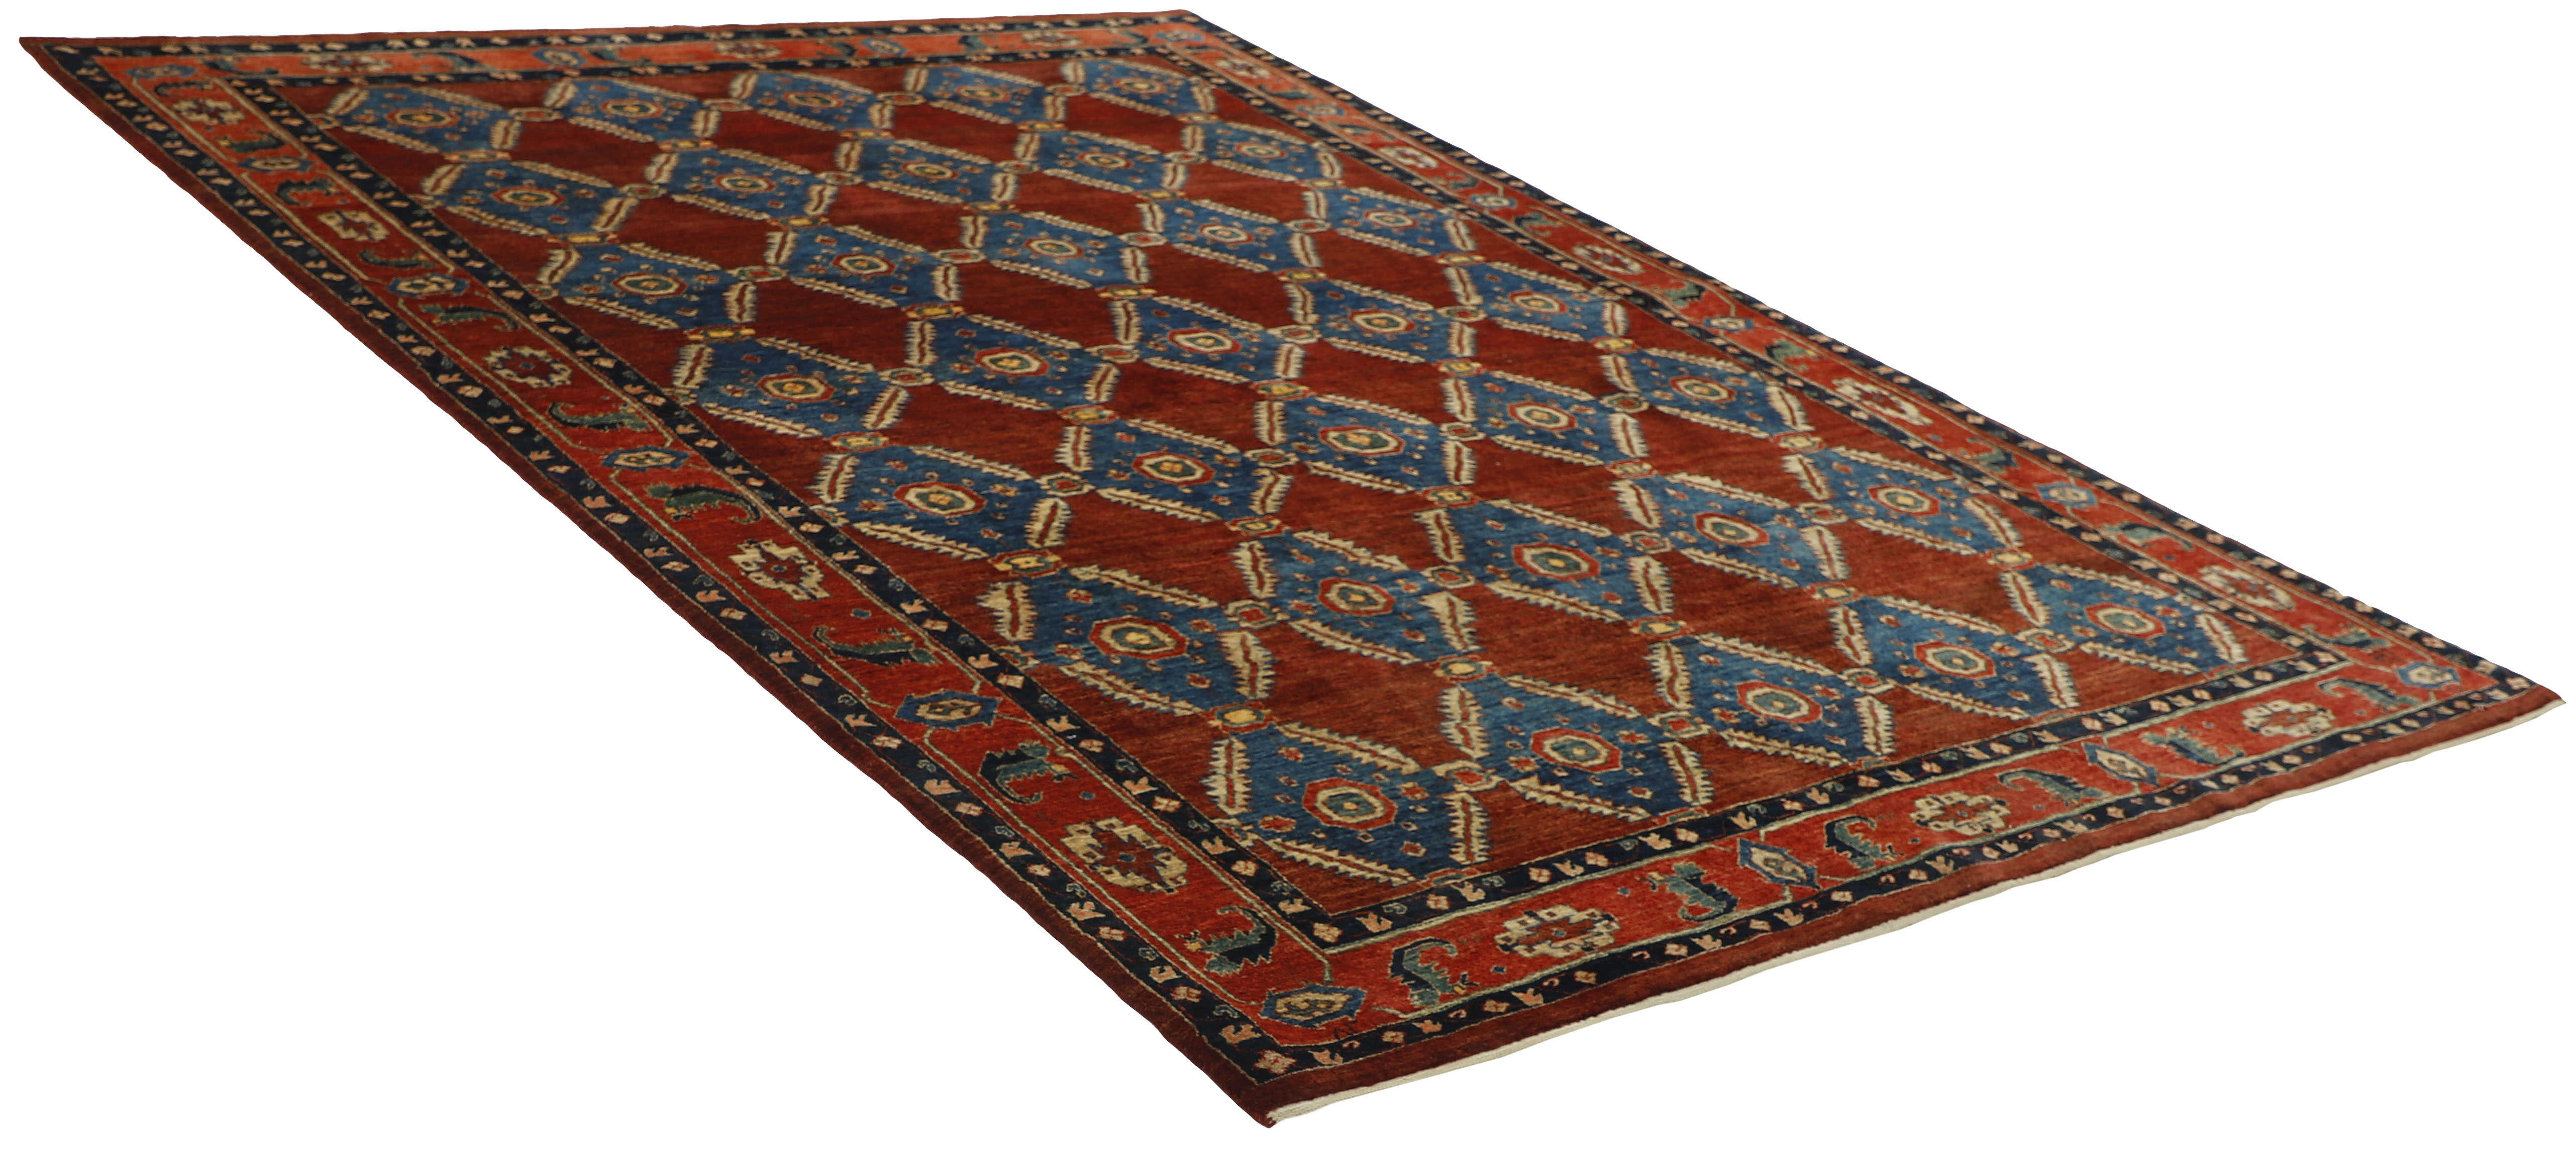 Authentic persian rug with a traditional tribal design in red